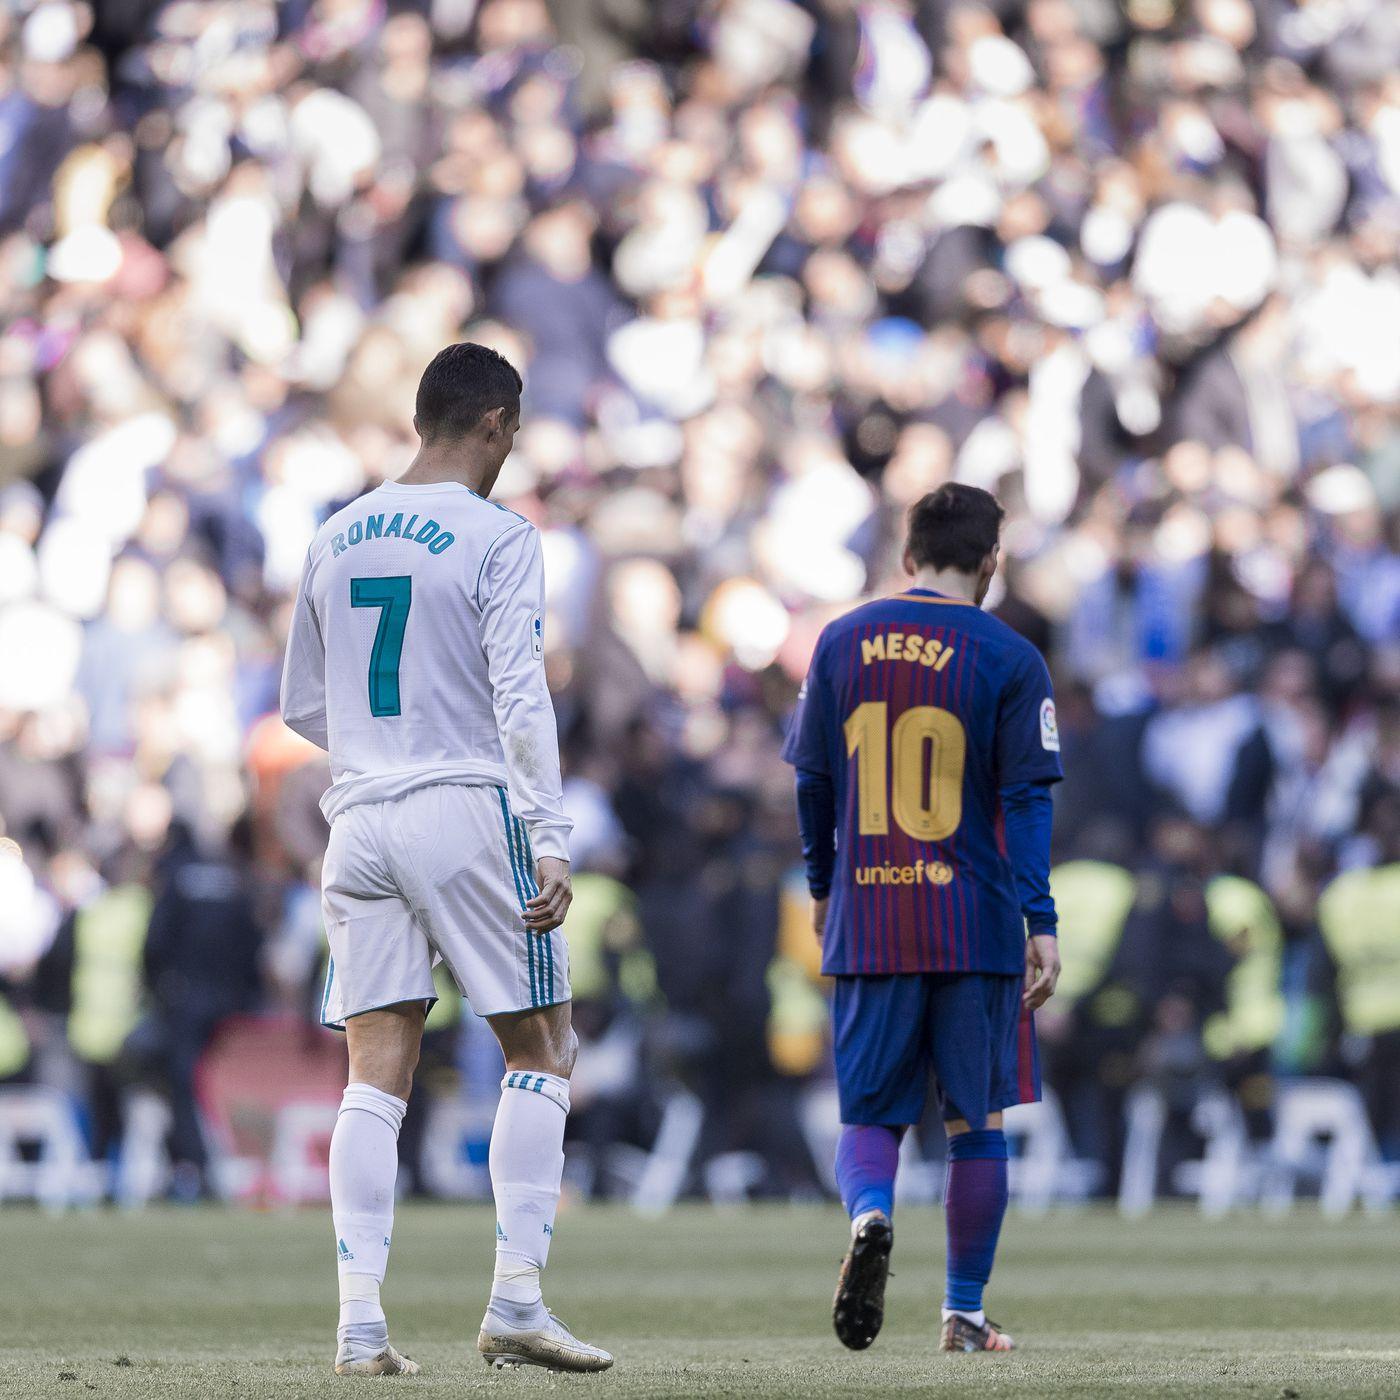 My rivalry with Messi is over, says Ronaldo - Vanguard News